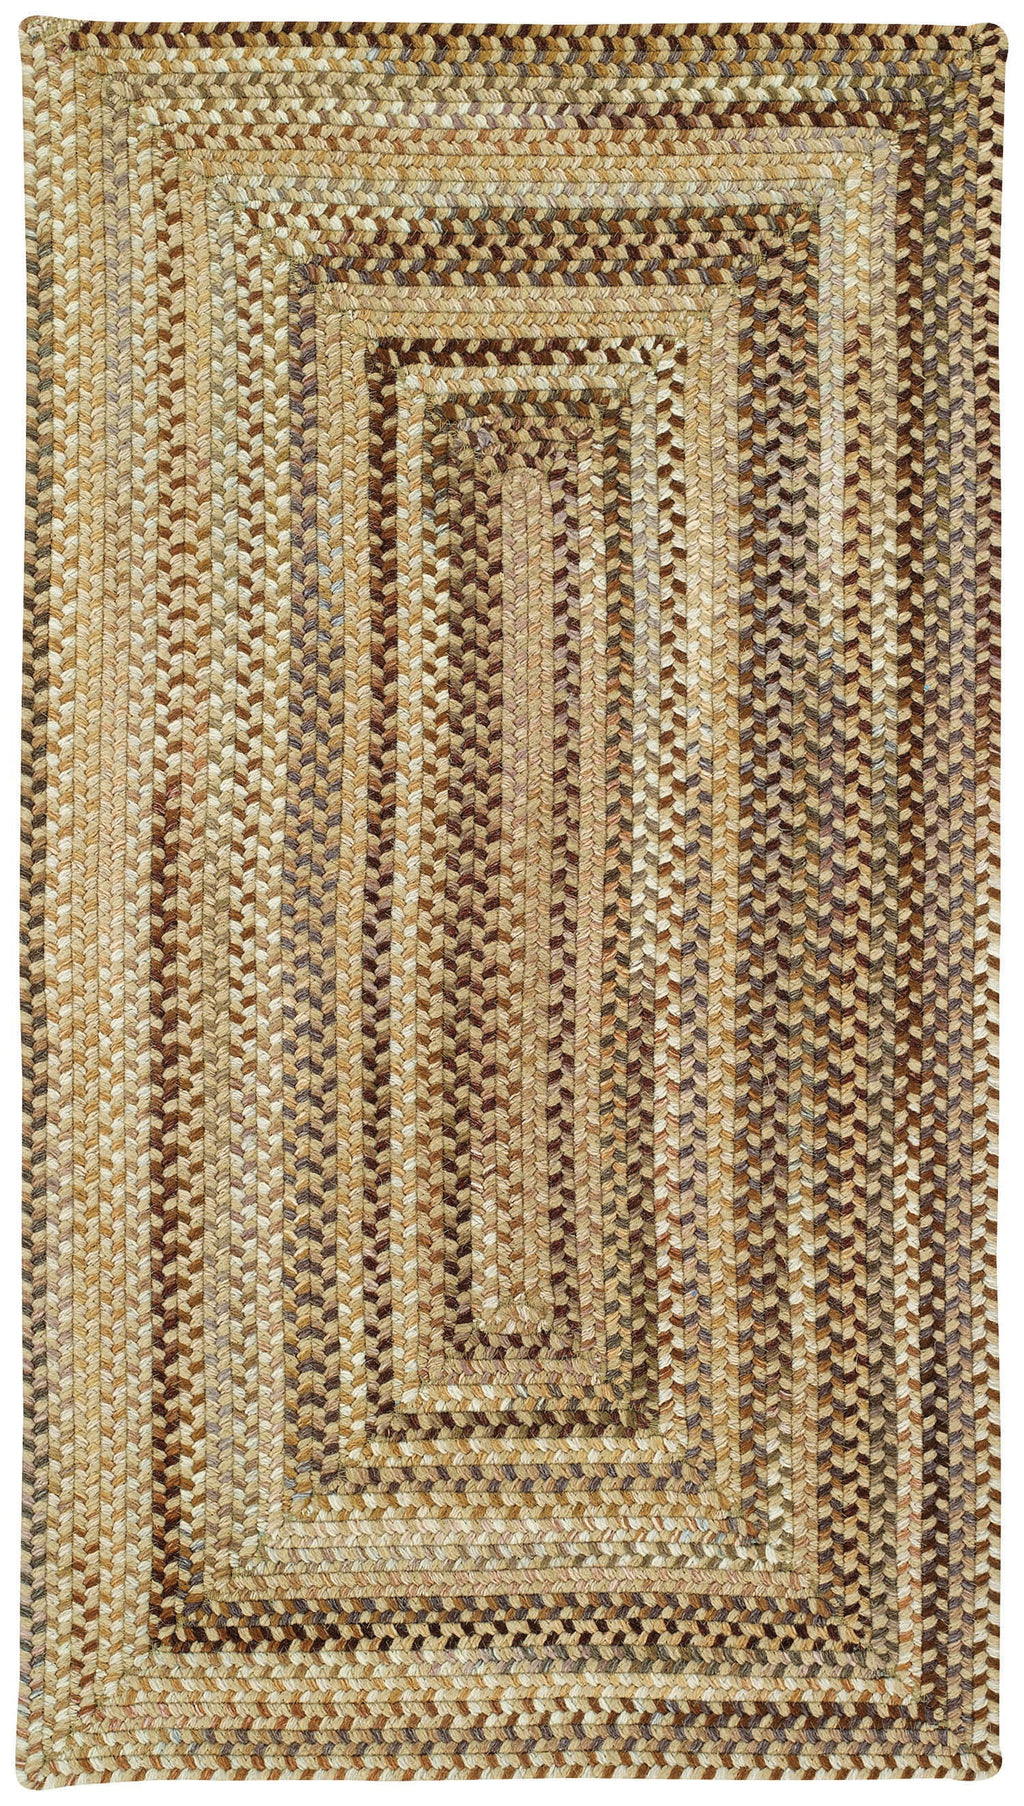 Capel Manchester 0048 Beige Hues 750 Area Rug main image